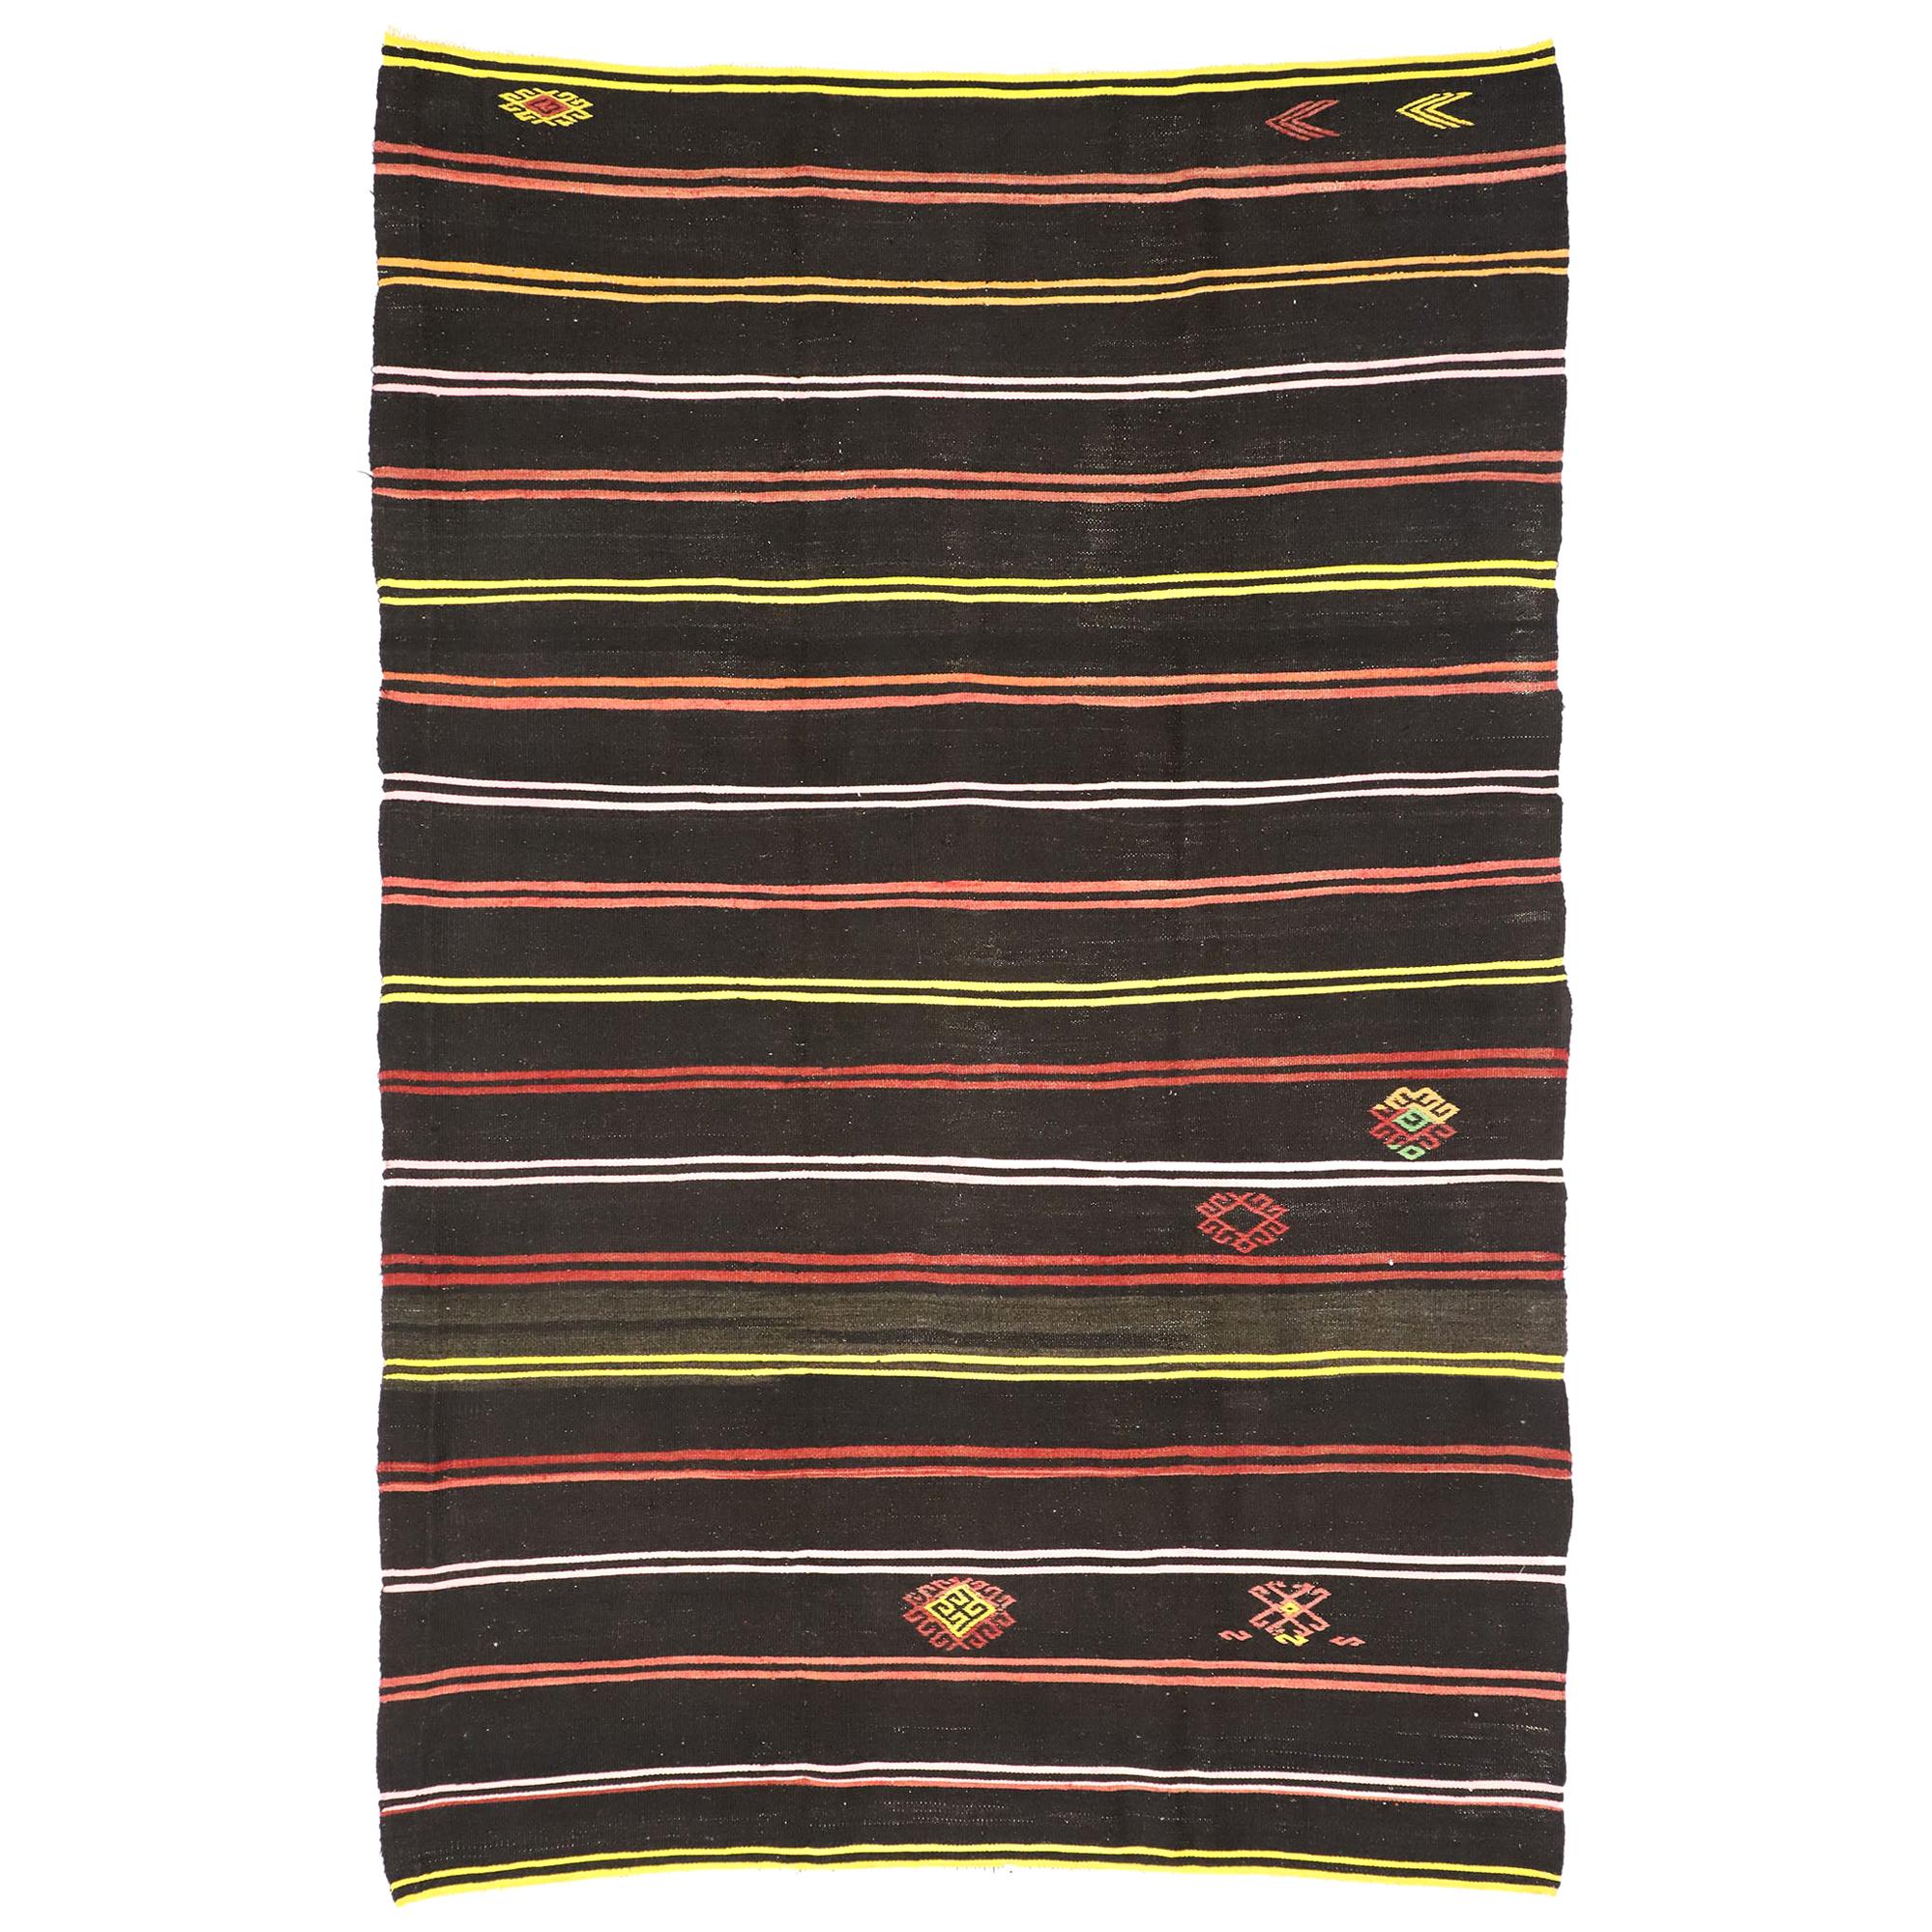 Vintage Turkish Striped Kilim Rug with Tribal Bohemian Style, Flat-Weave Rug For Sale